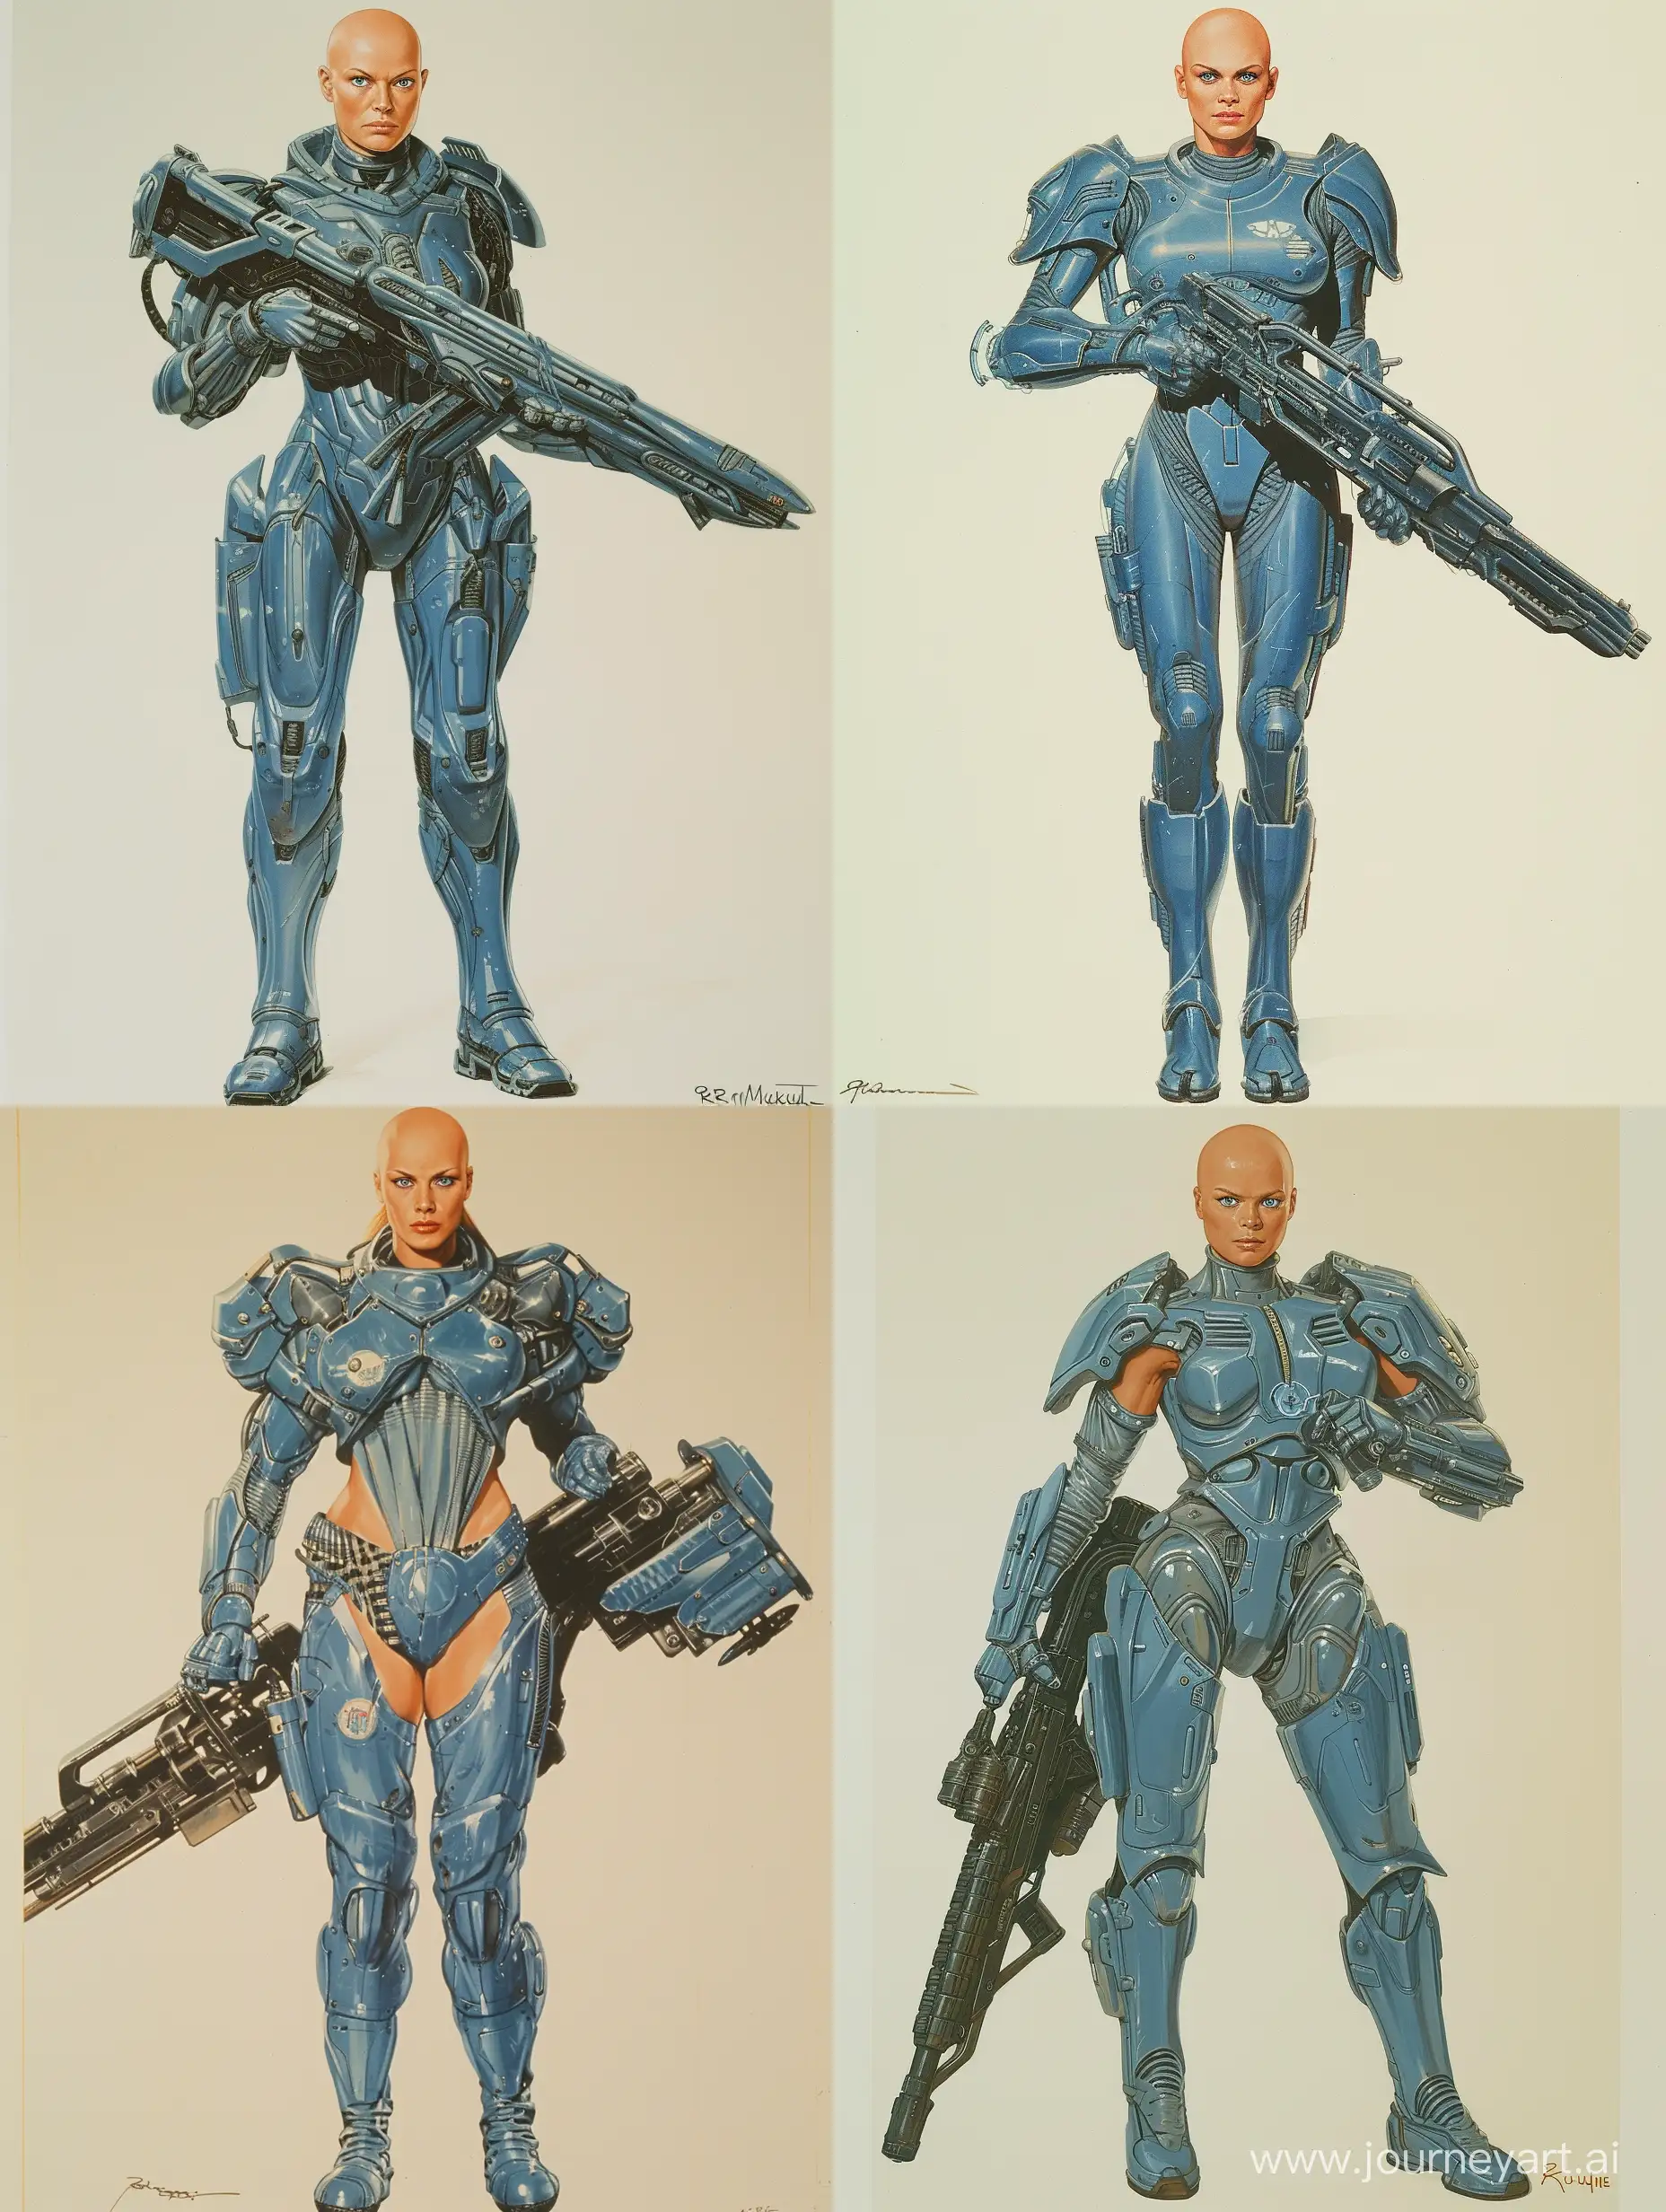 A tall bald handsome woman wearing a suit of futuristic blue plated armor and holding a futuristic metal rifle painted by Ralph McQuarrie. entire body shown. feet shown. blue eyes. in retro science fiction art style--ar 9:16

